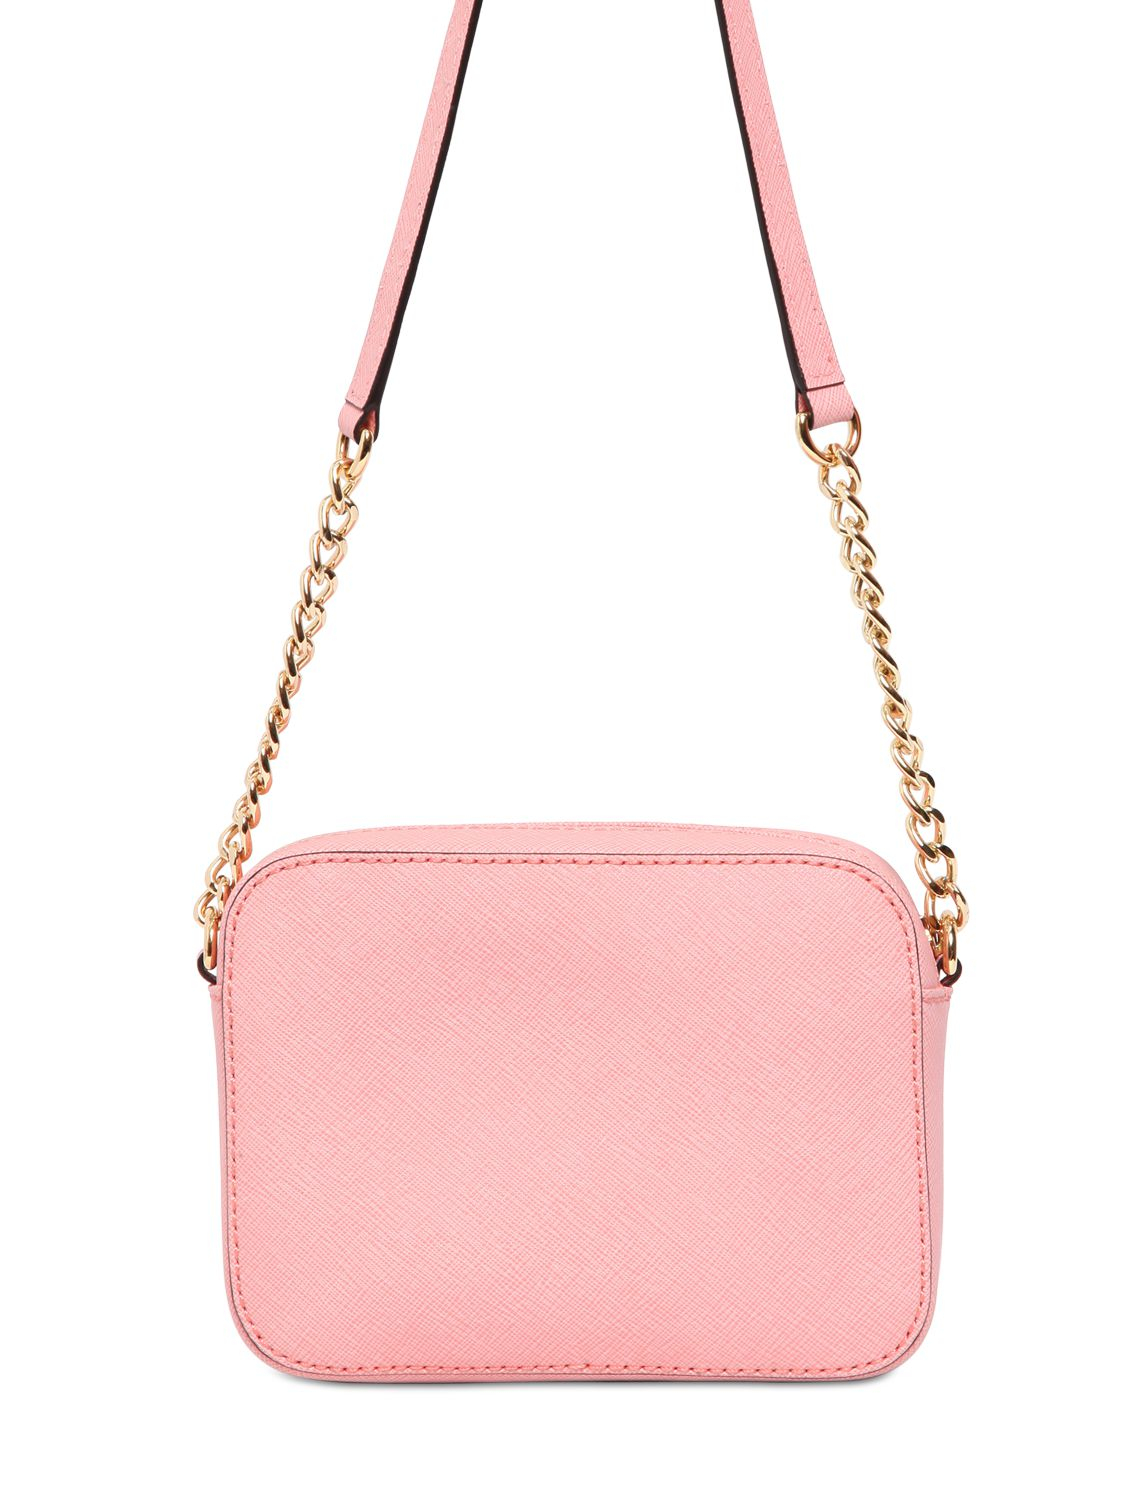 Michael Kors Light Pink Purses | Confederated Tribes of the Umatilla Indian Reservation